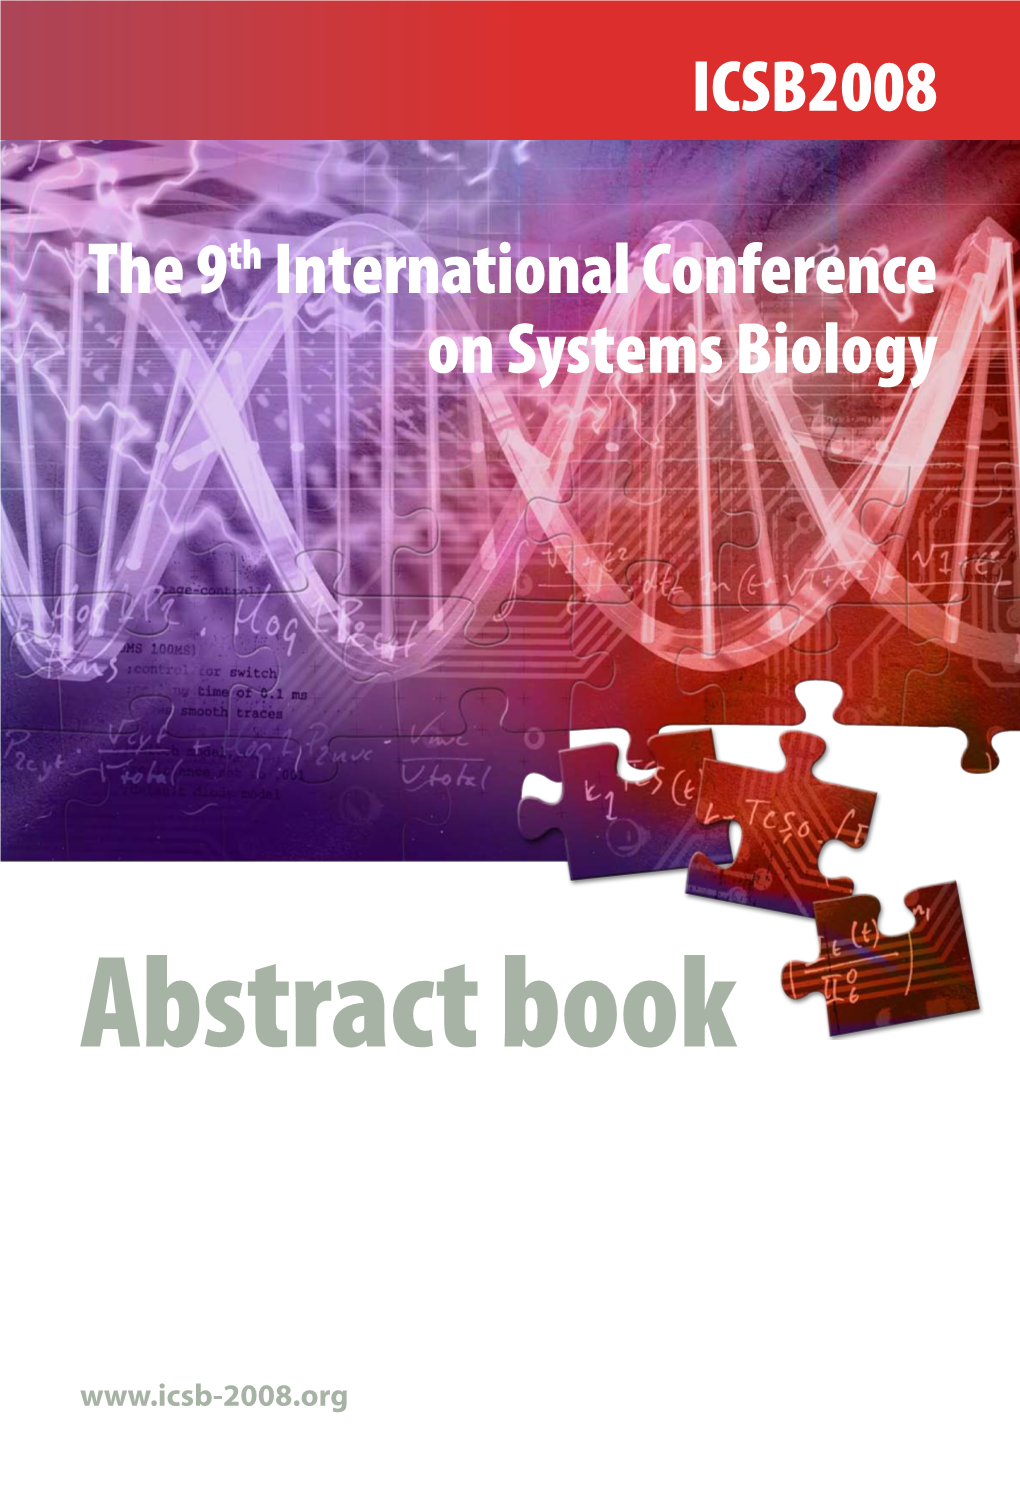 The 9Th International Conference on Systems Biology ICSB2008